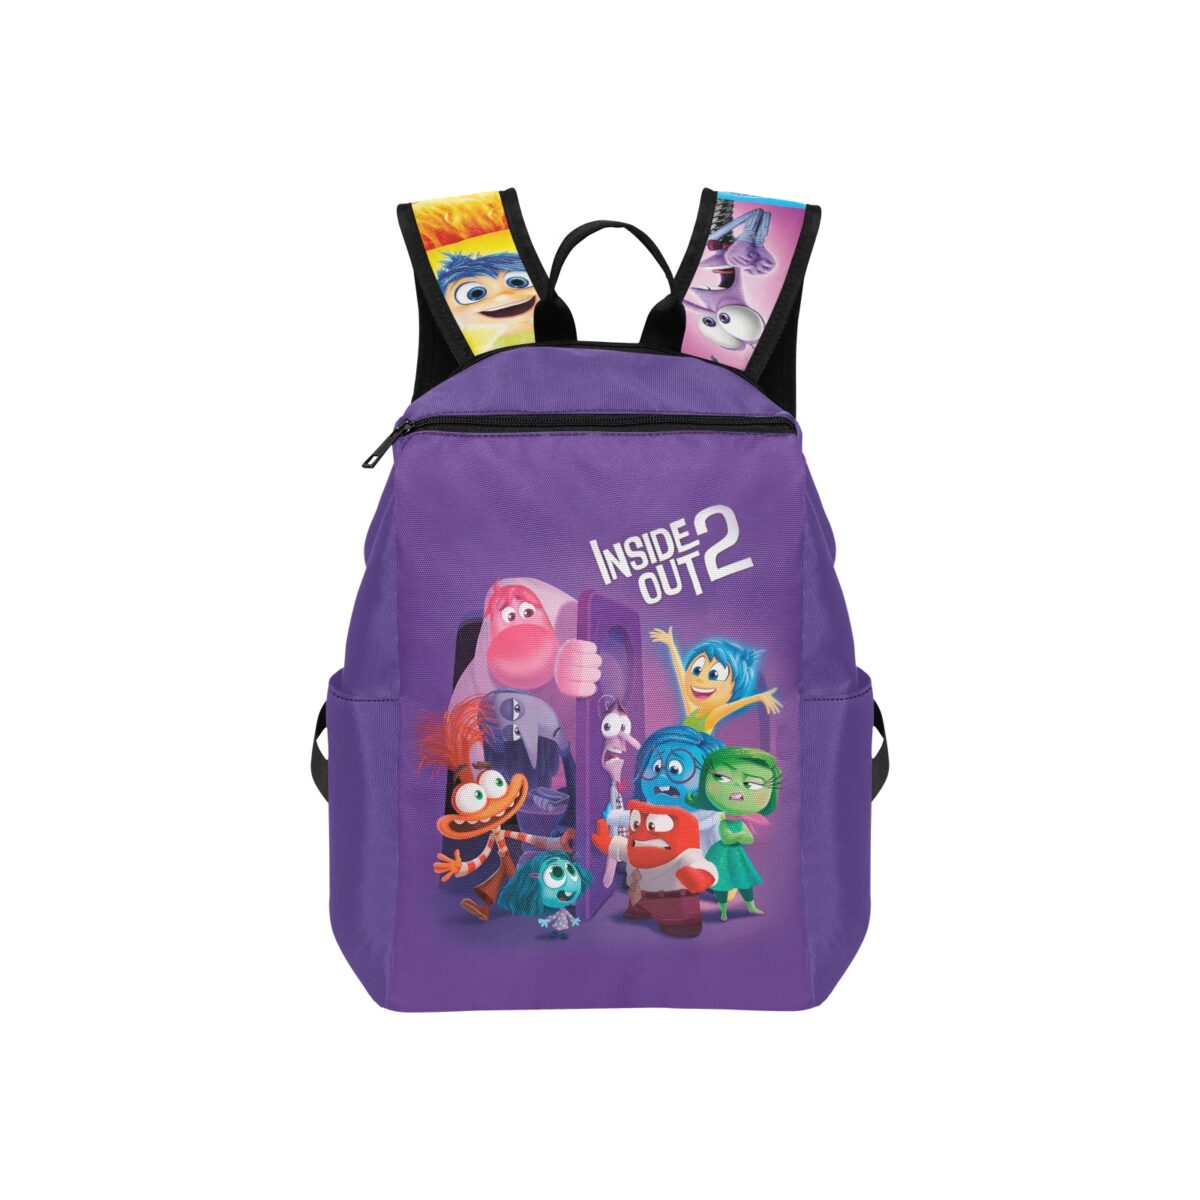 Inside Out 2 Movie Inspired Lightweight Casual Backpack – Perfect for School, Work, and Travel Cool Kiddo 14